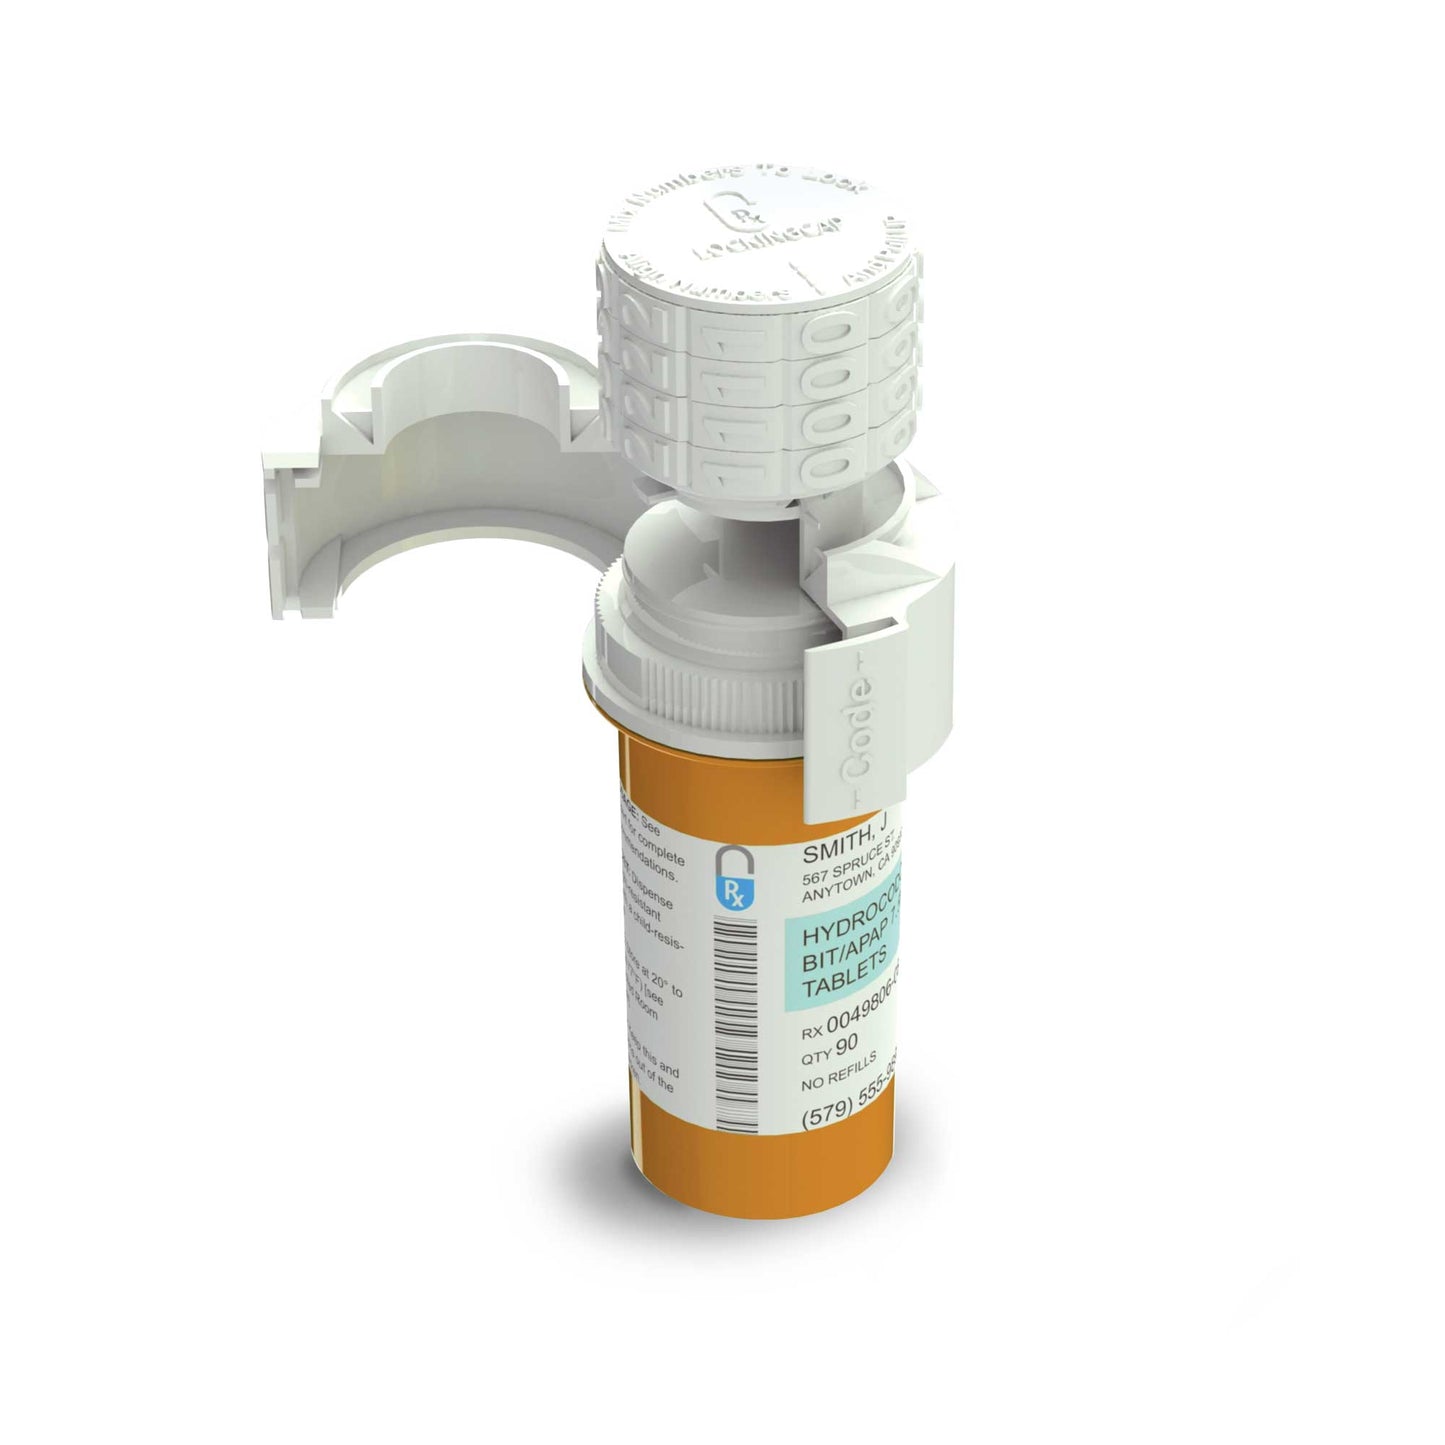 An orange pill bottle on a white background. The Rx Locking Cap product is on top. It's a white cap with a four-digit combination lock. The lock is shown in its open state. 